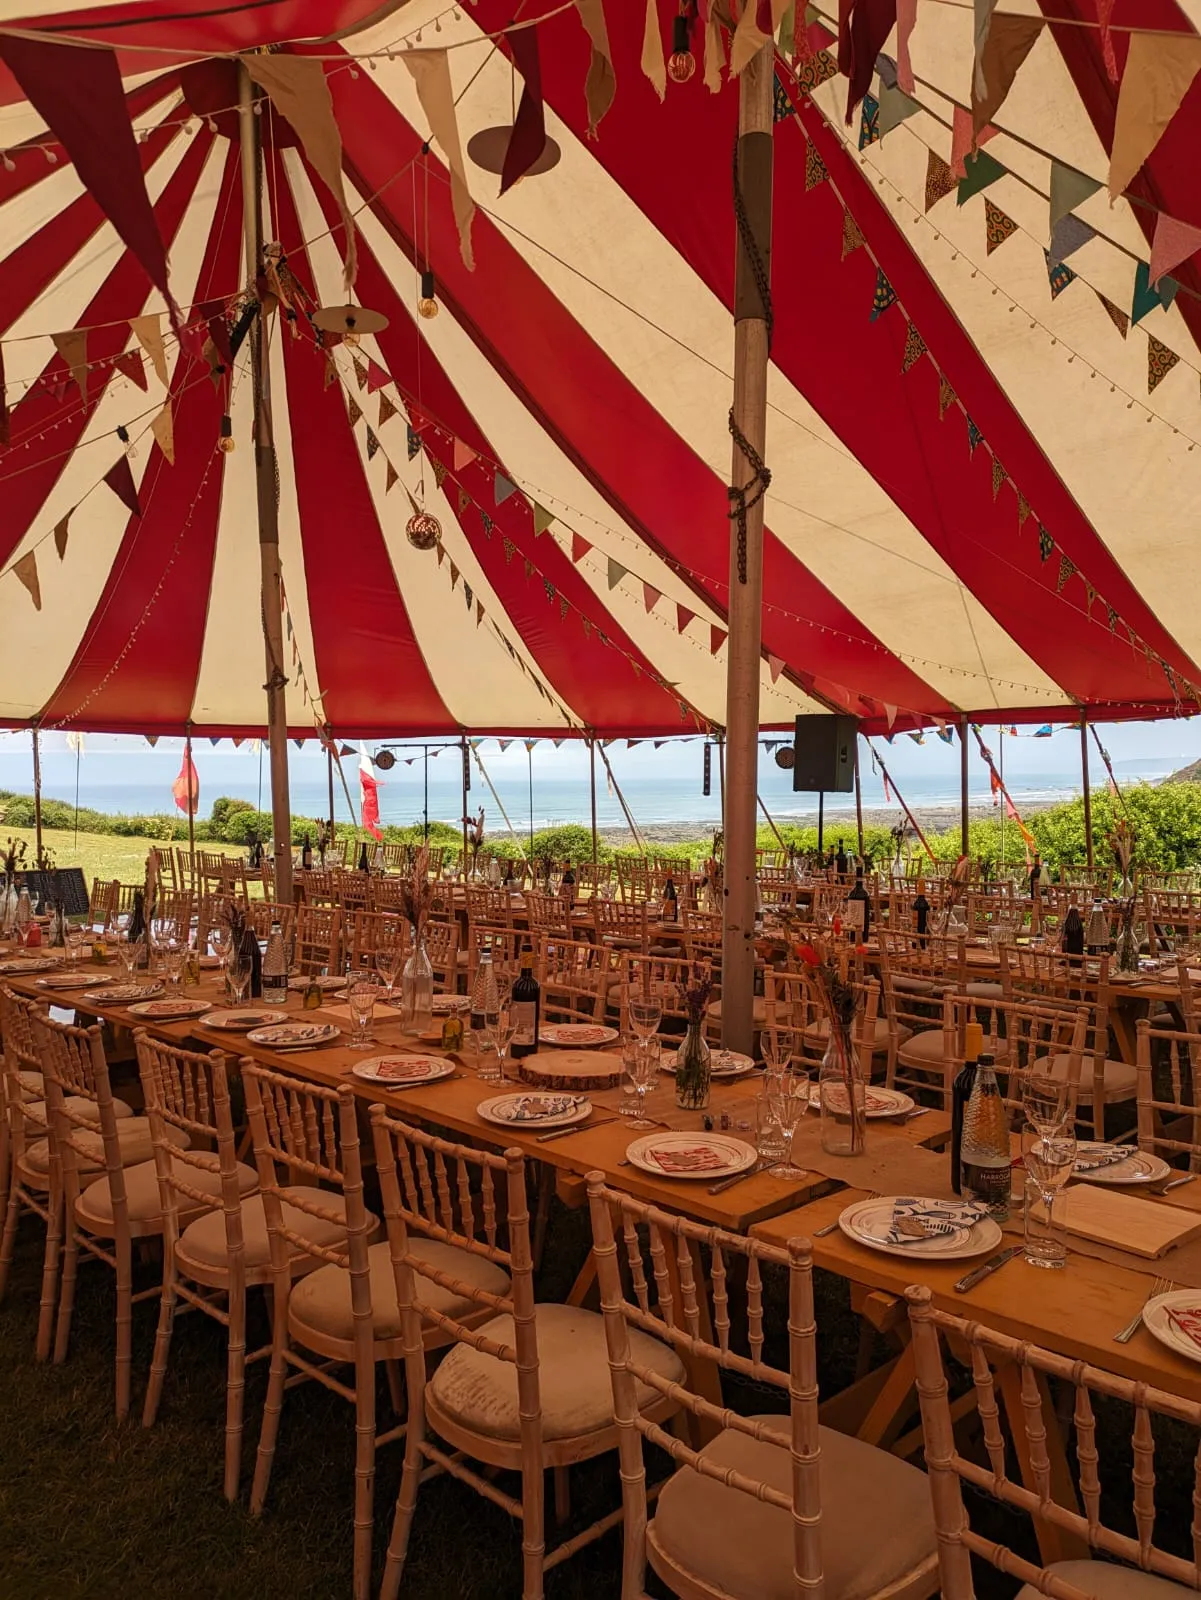 wedding tables laid up with table decorations and seating for 100 people in a marquee